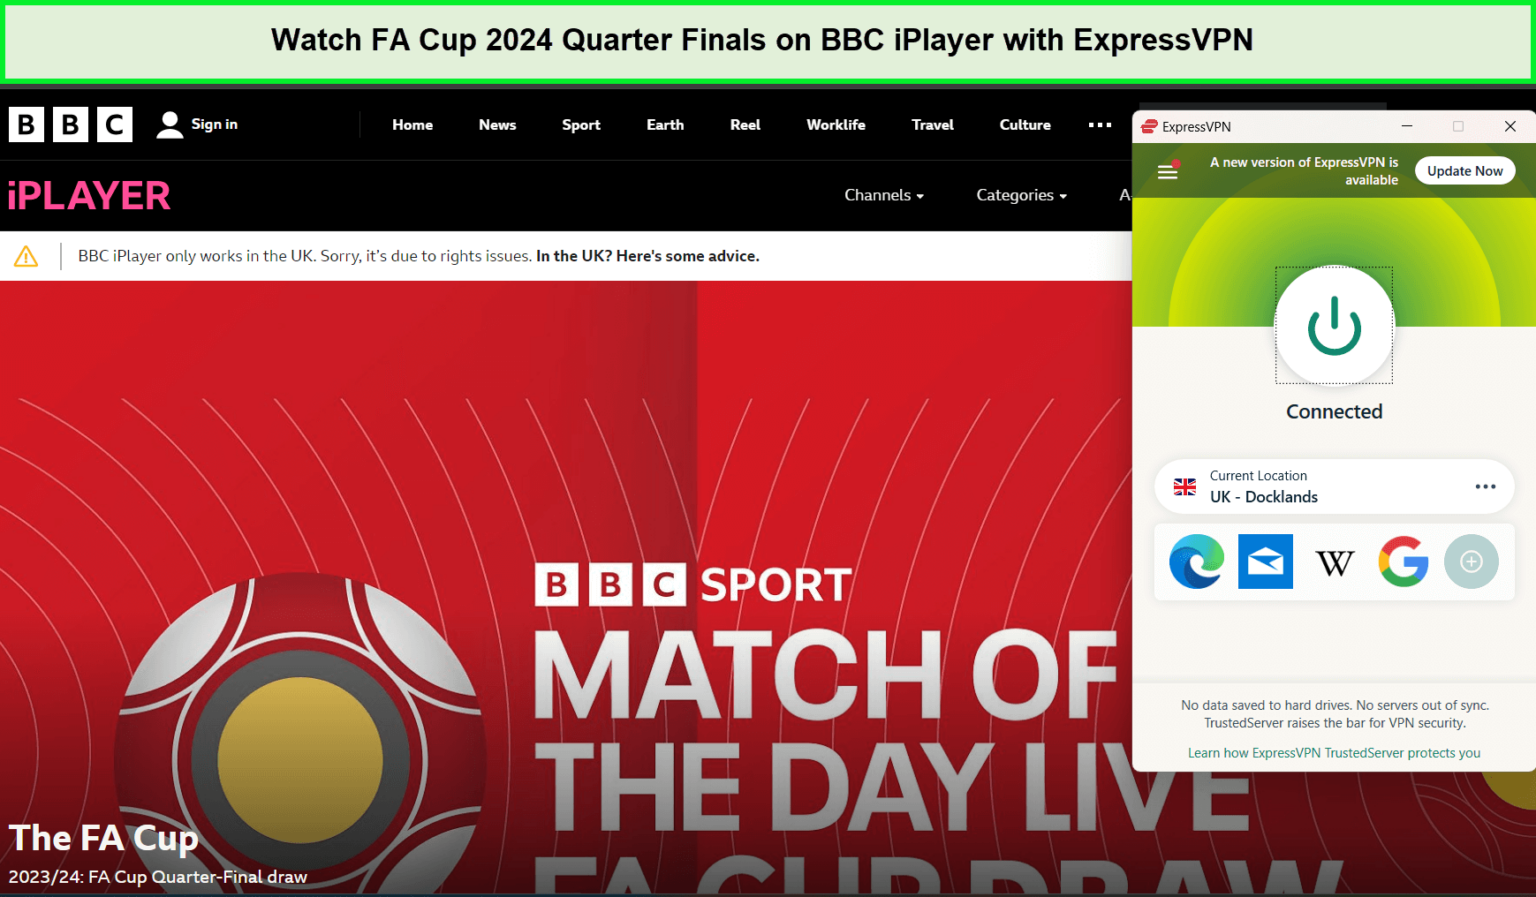 Watch FA Cup 2024 Quarter Finals outside UK